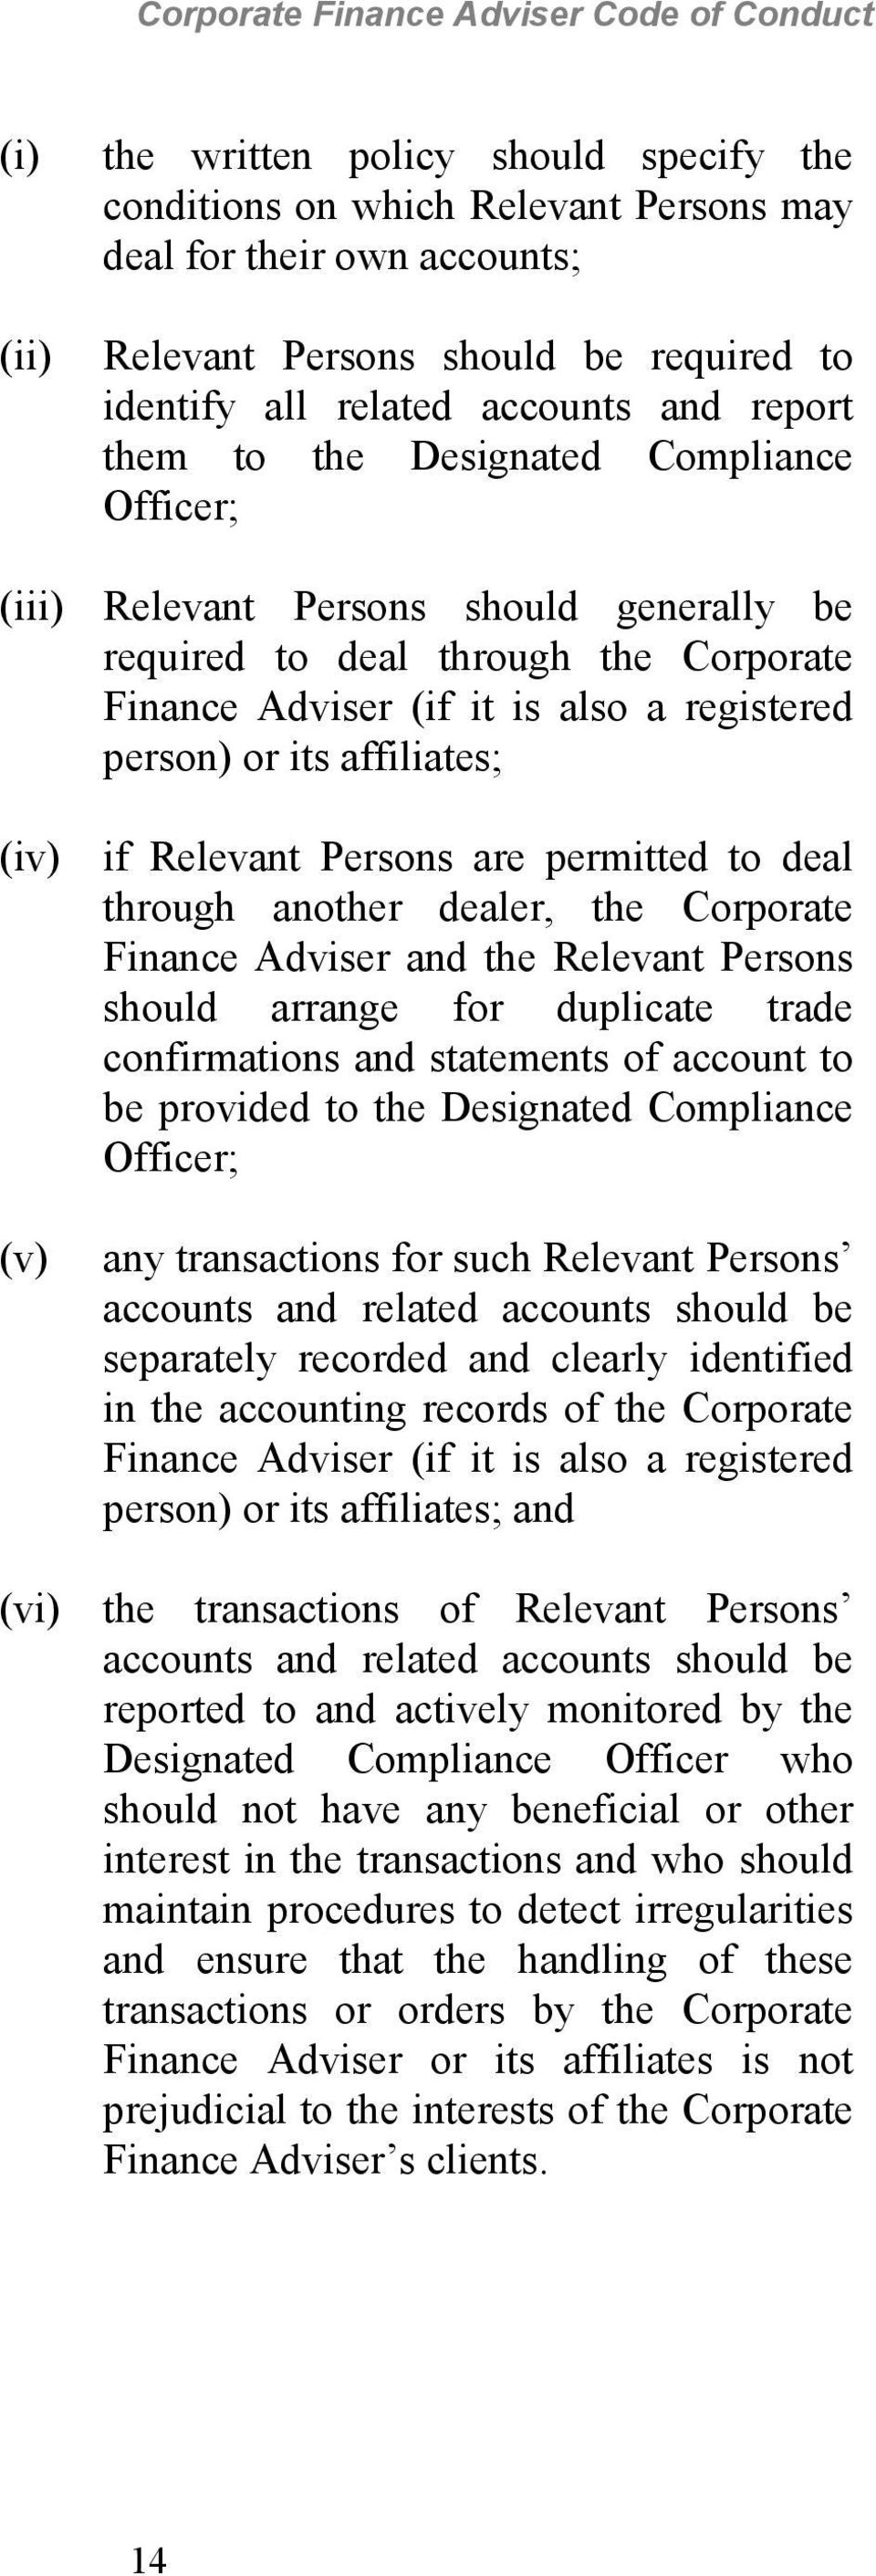 (iv) if Relevant Persons are permitted to deal through another dealer, the Corporate Finance Adviser and the Relevant Persons should arrange for duplicate trade confirmations and statements of